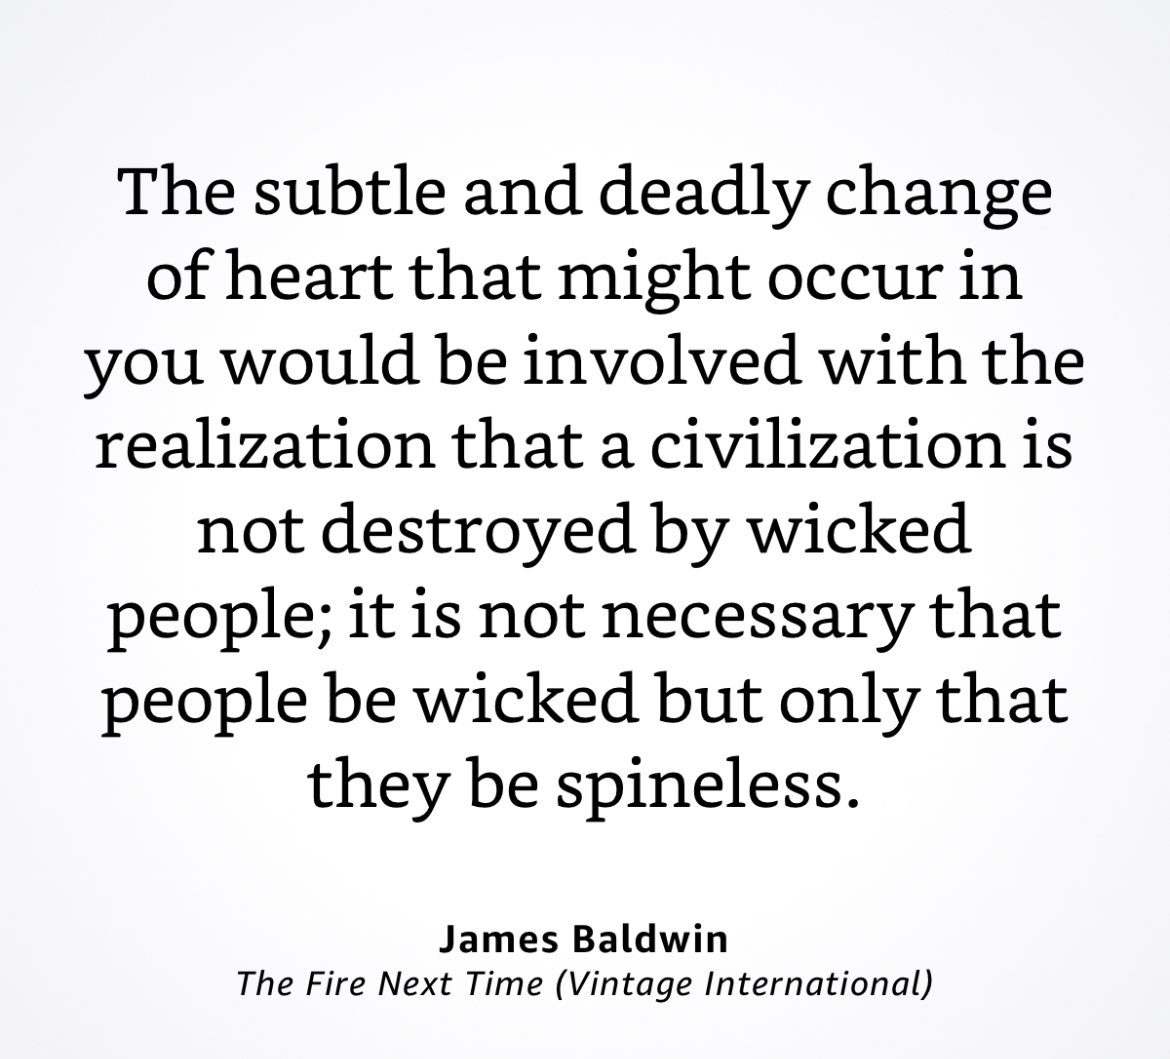 The reason James Baldwin remains popular over the years is his writing really is timeless. Reading him again makes me wish we knew what he would be saying now. I mean he had the coward @robportman figured out decades ago #spineless #JamesBaldwin